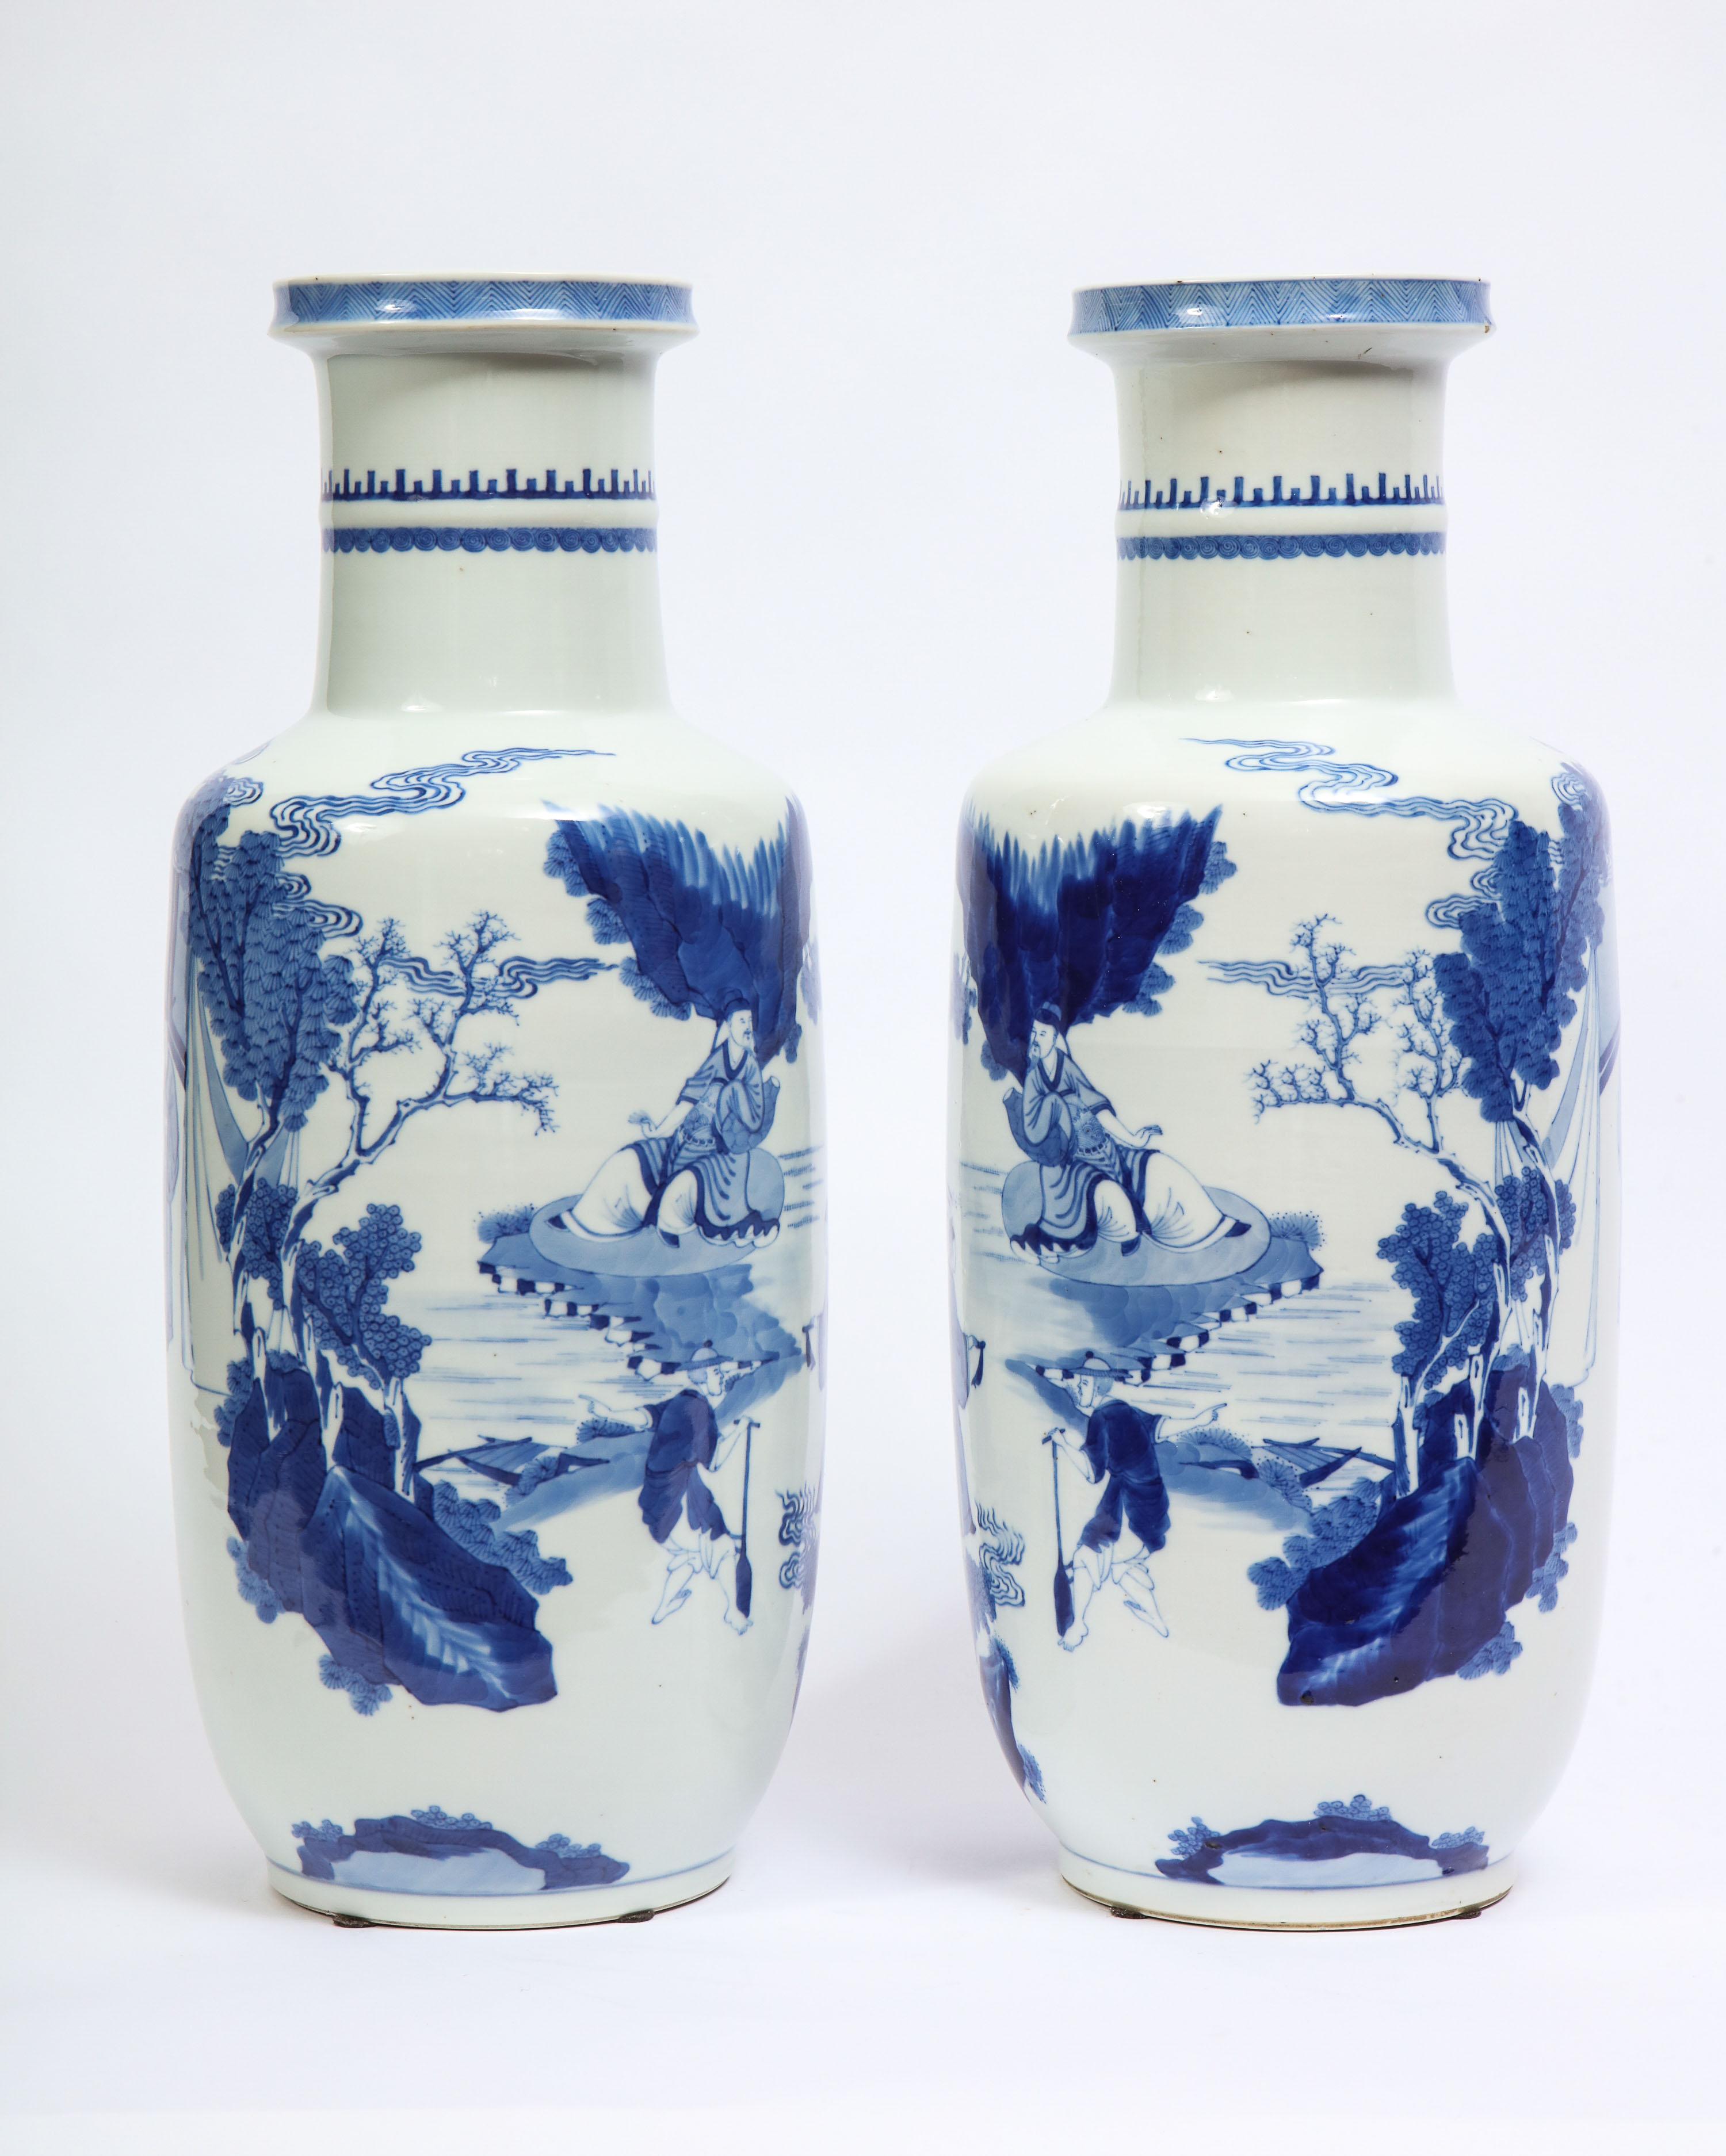 A fabulous pair of Chinese blue and white porcelain Bangchui Ping (ROULEAU) form vases with imperial court painted scenes. With an exceptional Rouleau form, this pair of vases is all hand painted with variable blue-hues. The body is beautifully hand